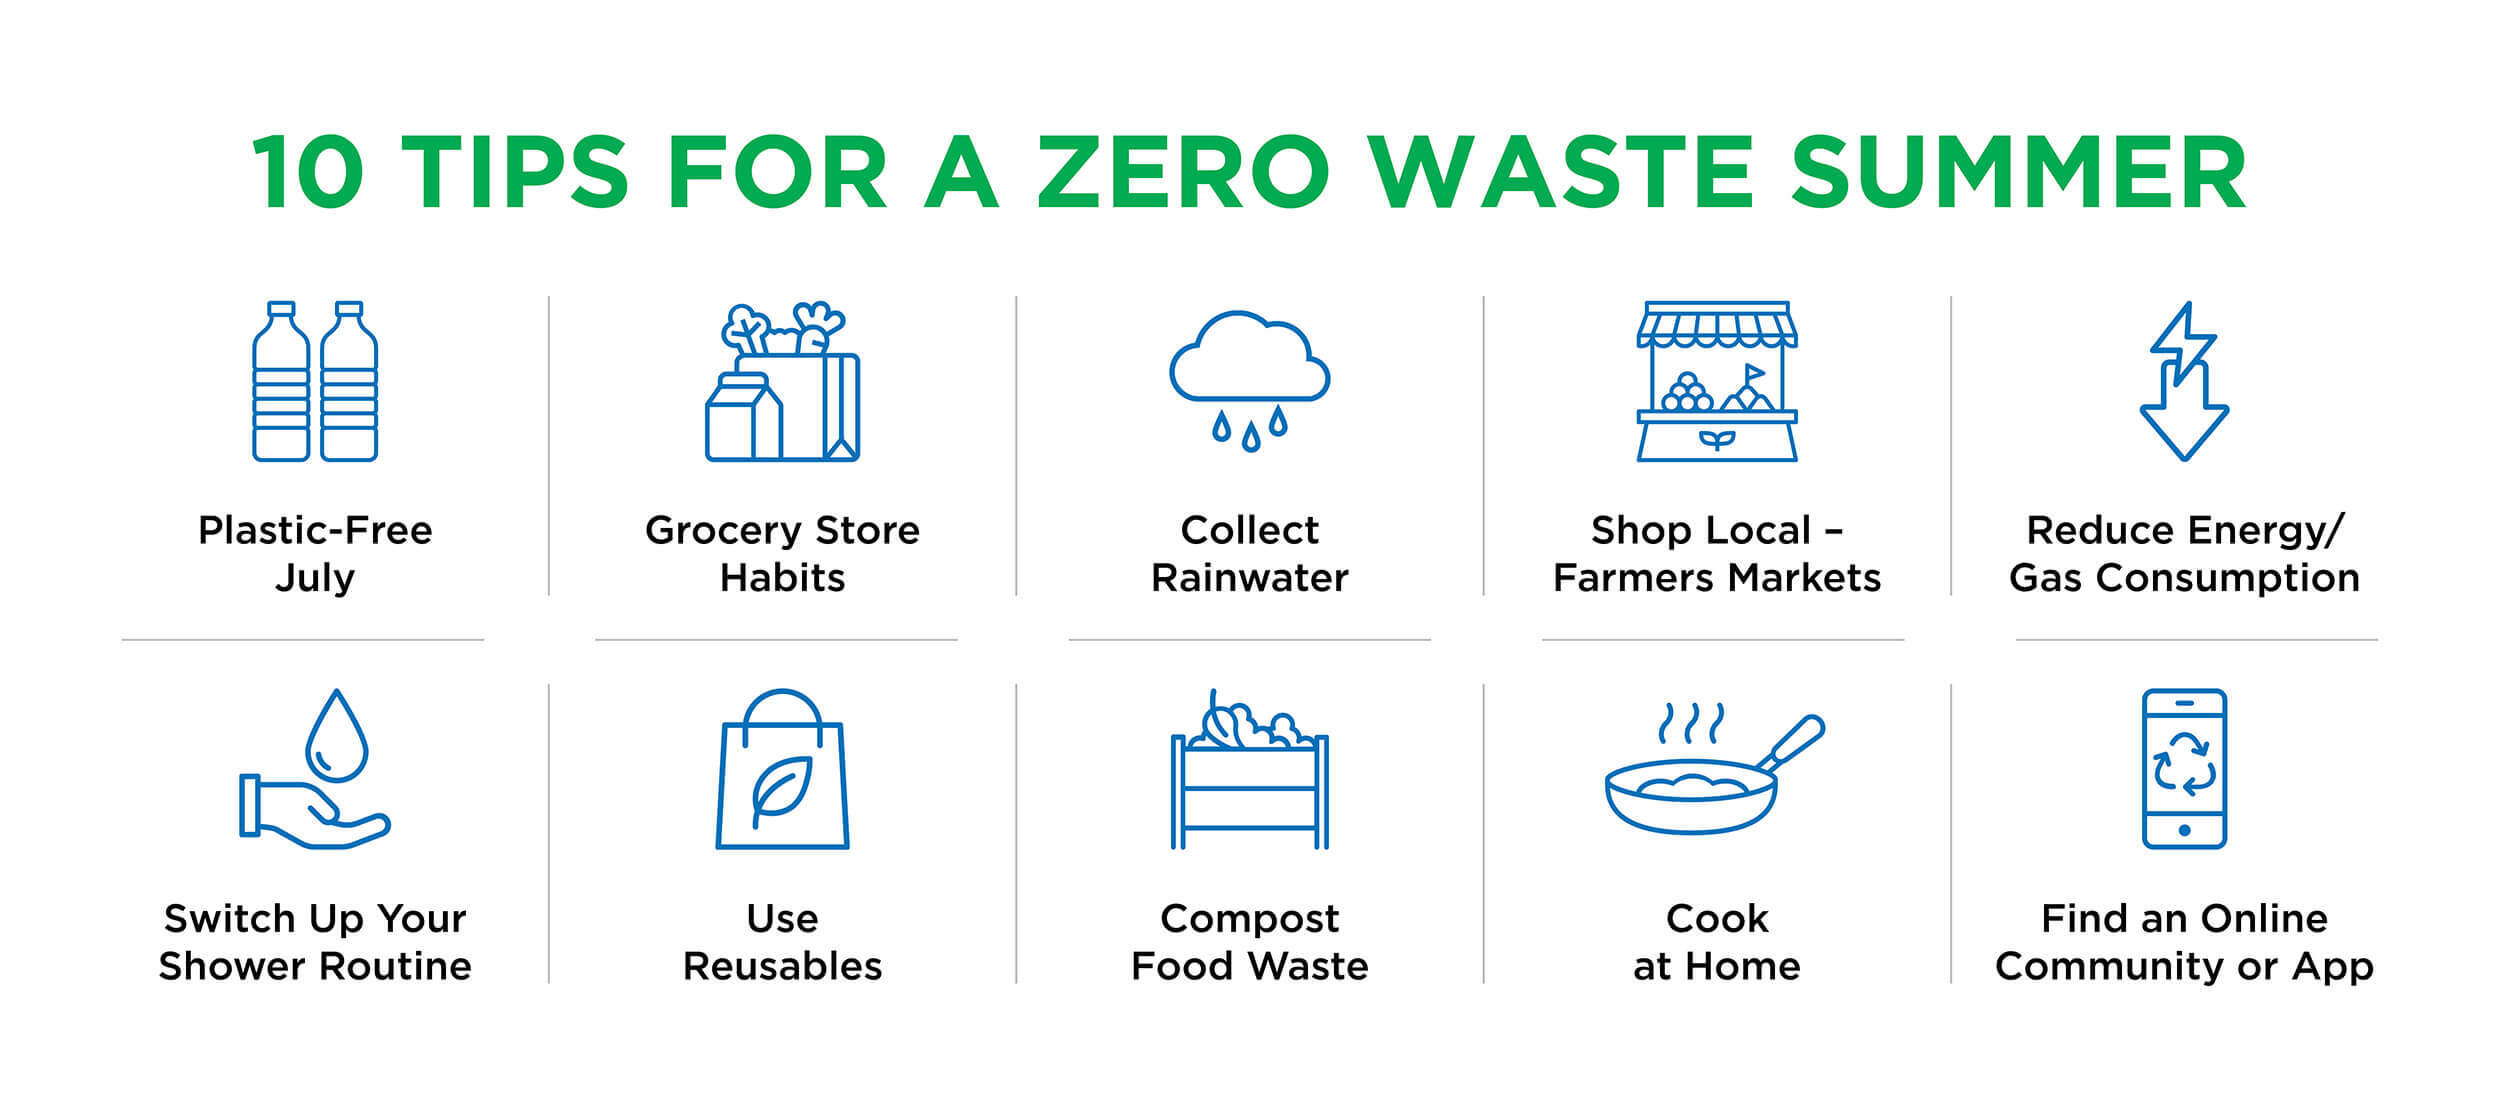 Images to show the 10 tips for a zero waste summer.